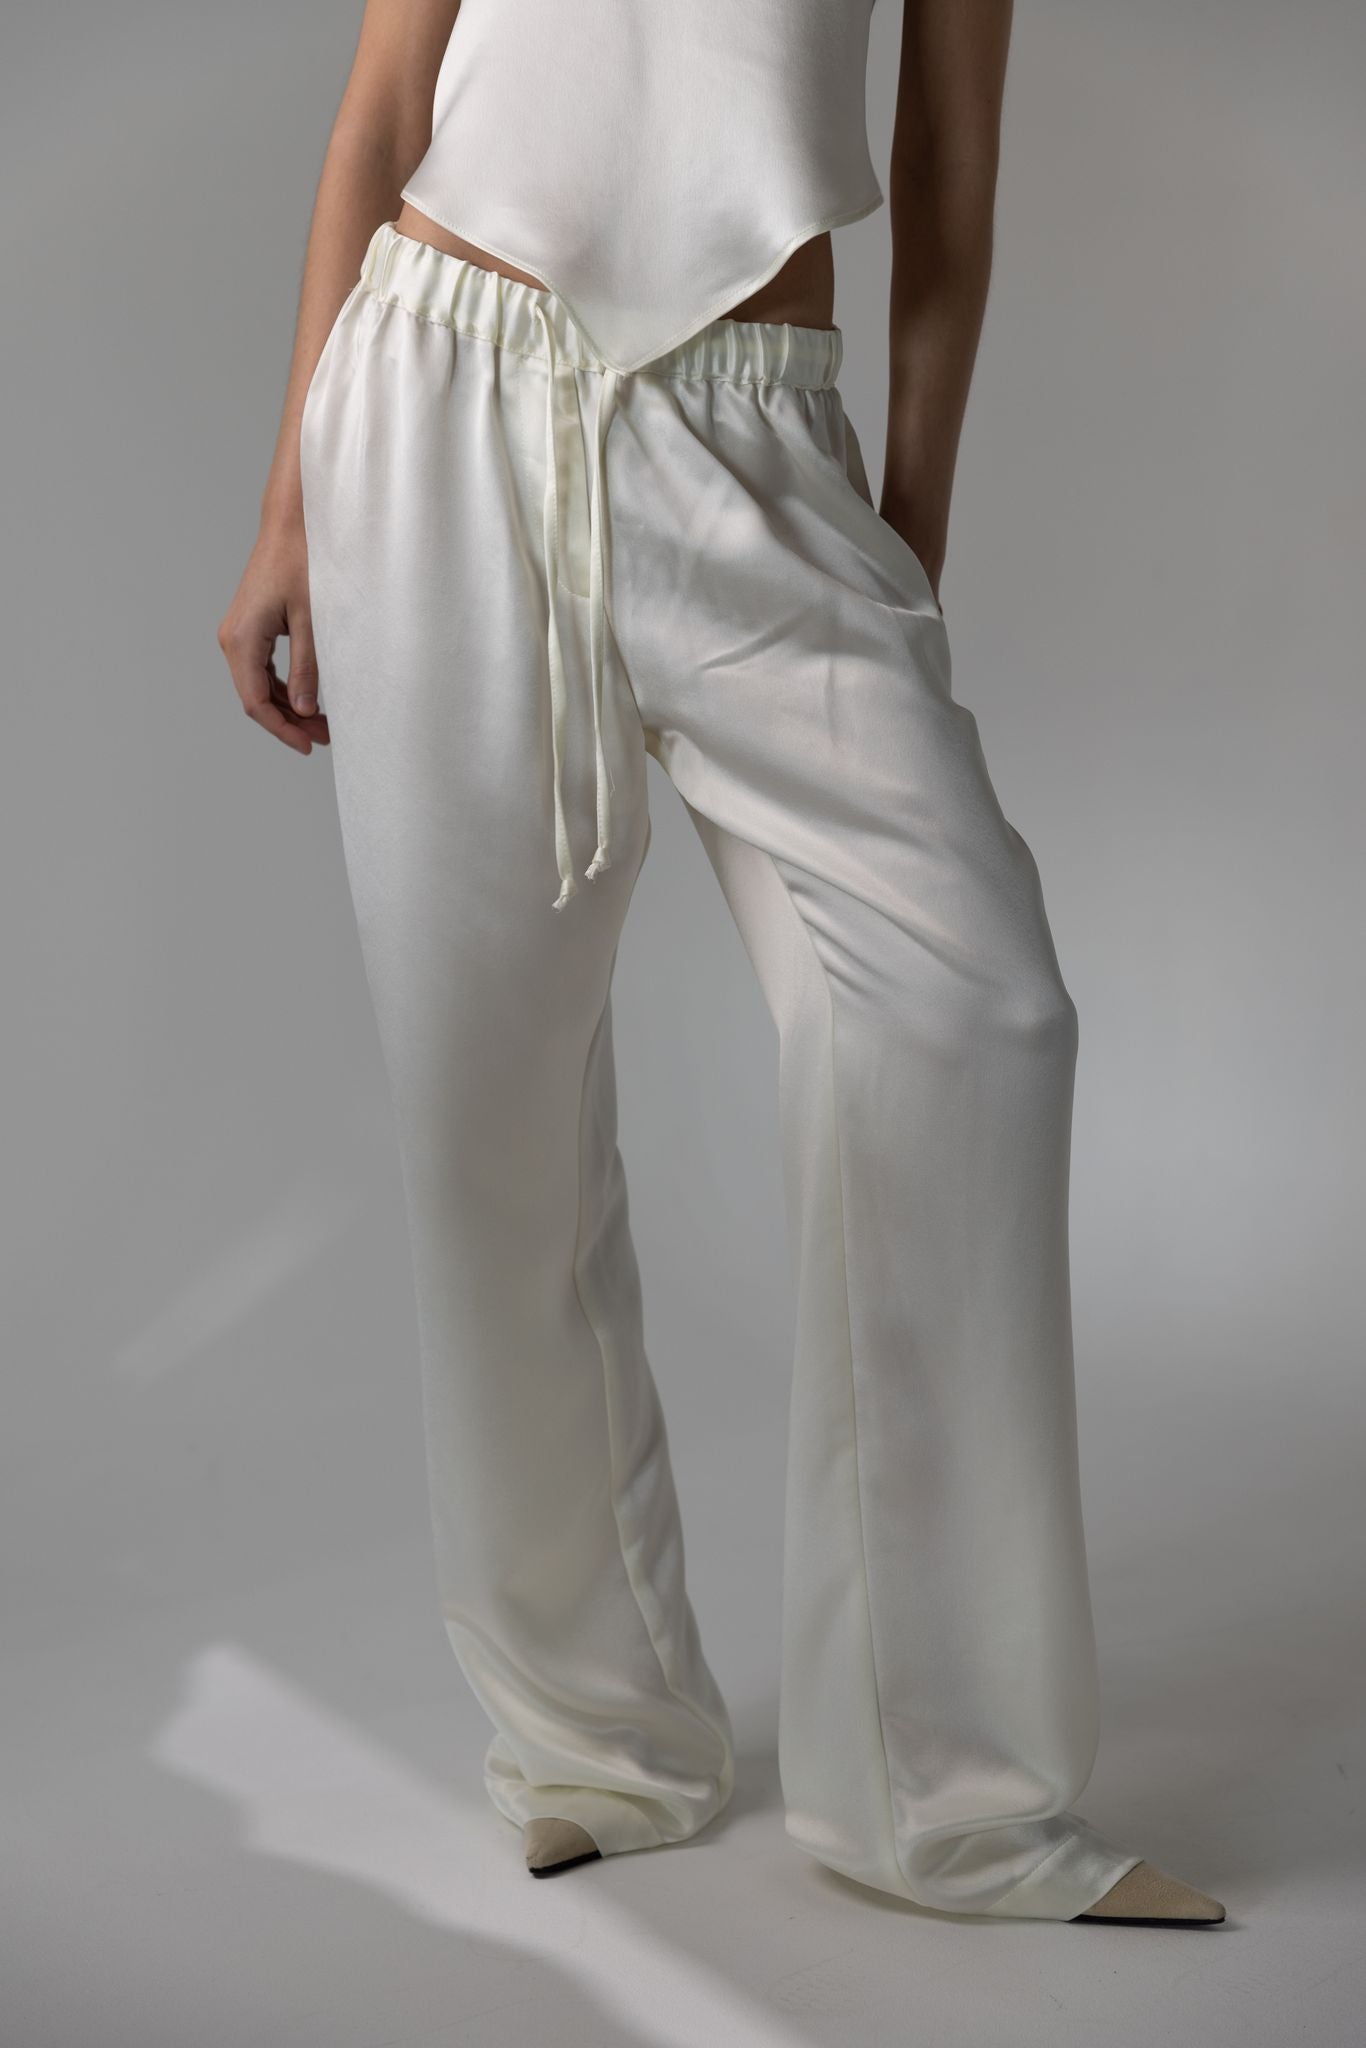 Buy Peach White Ankle Women Check Pant Brocade Silk for Best Price,  Reviews, Free Shipping